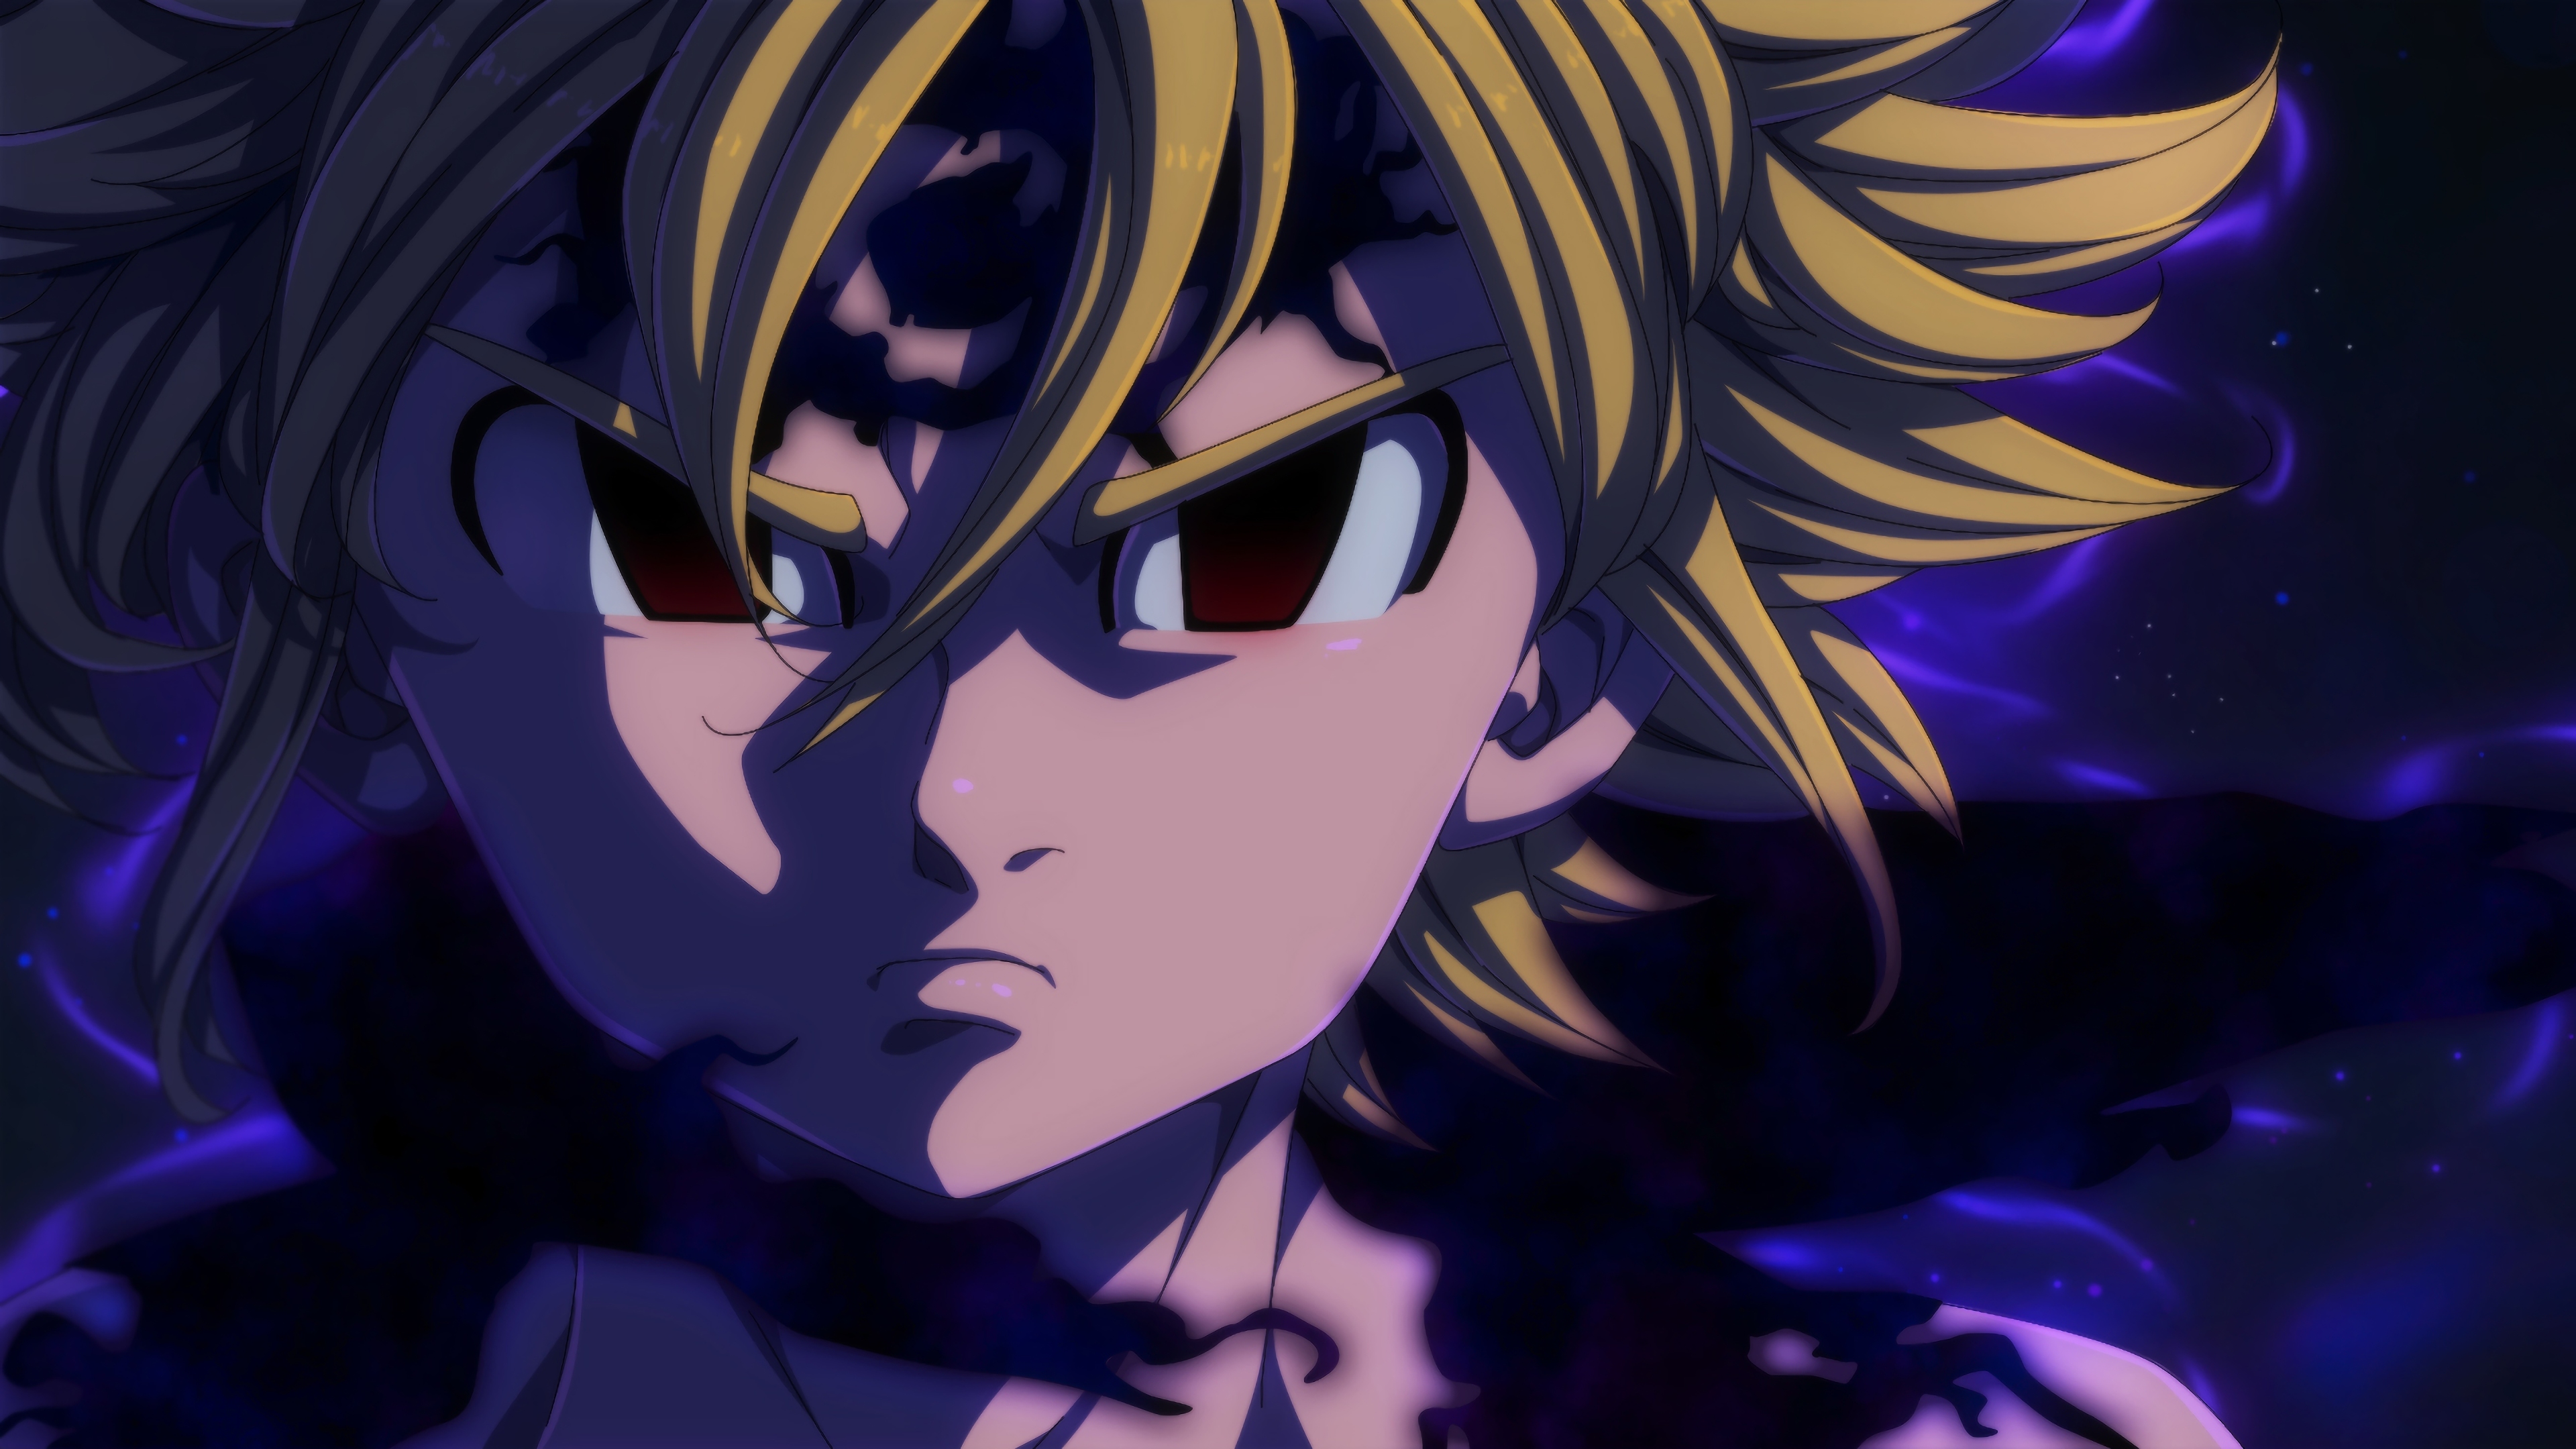 10 Demon King The Seven Deadly Sins HD Wallpapers and Backgrounds